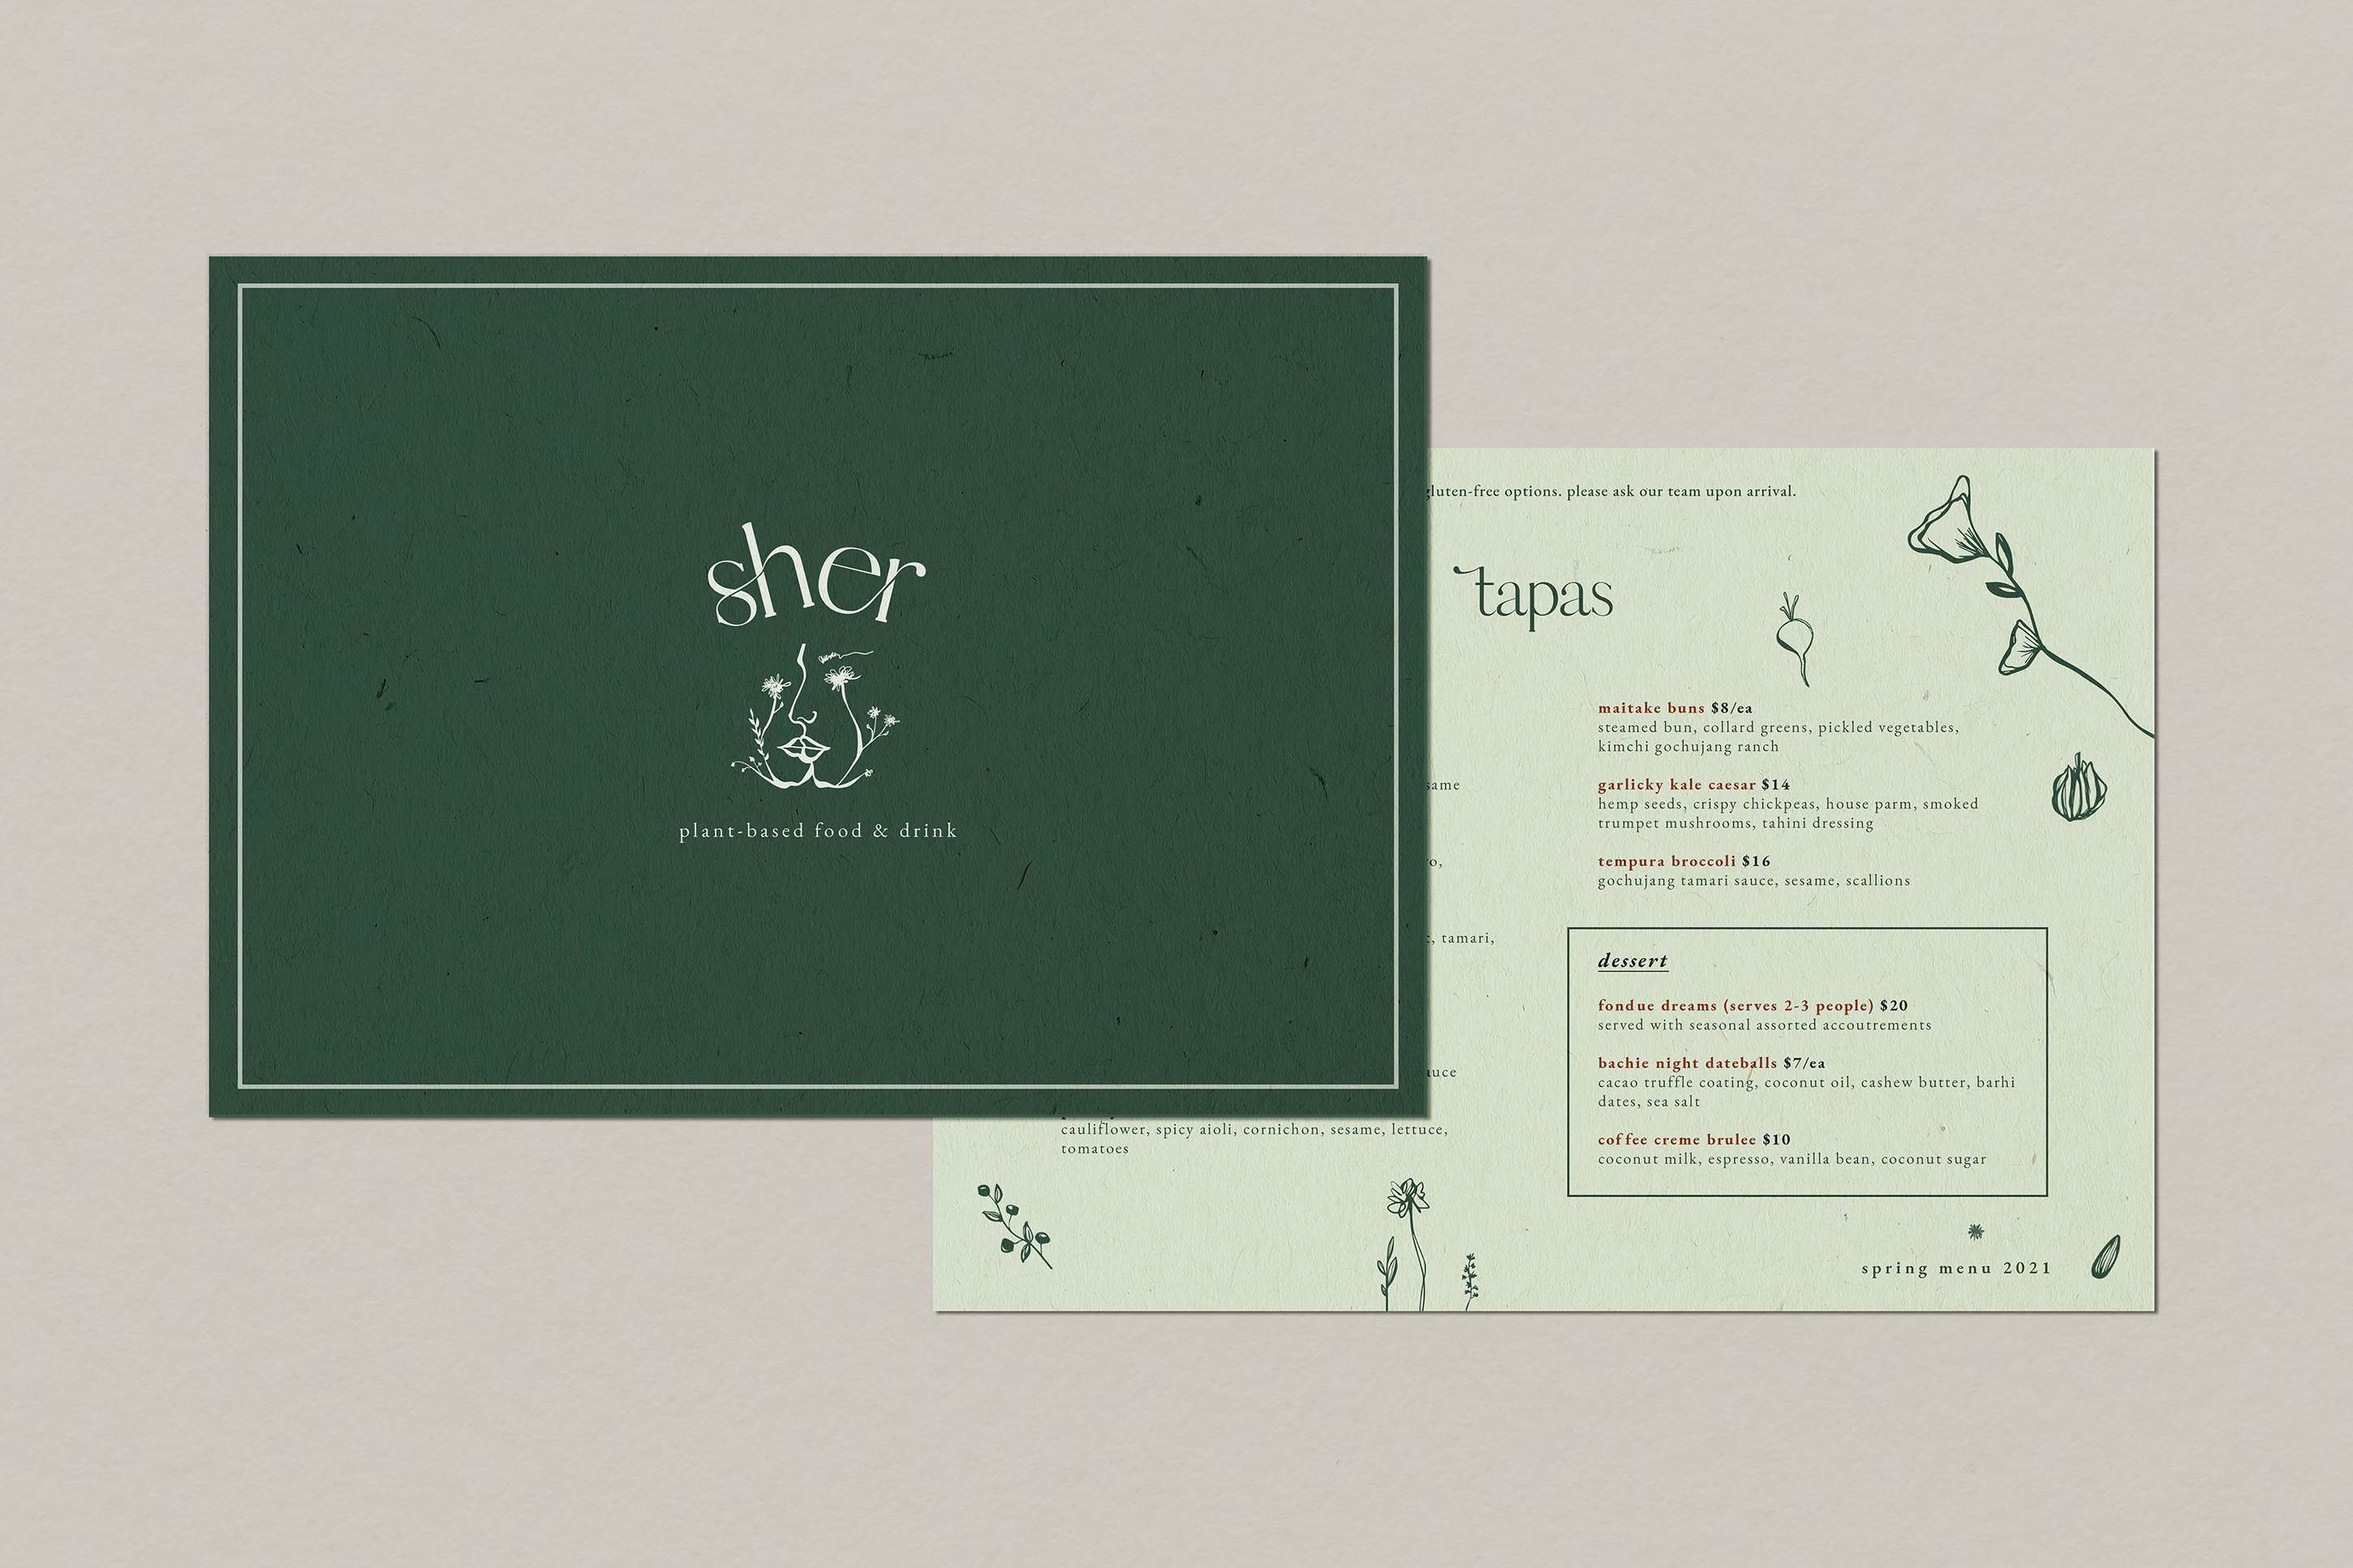 The front and back of the Sher food menu